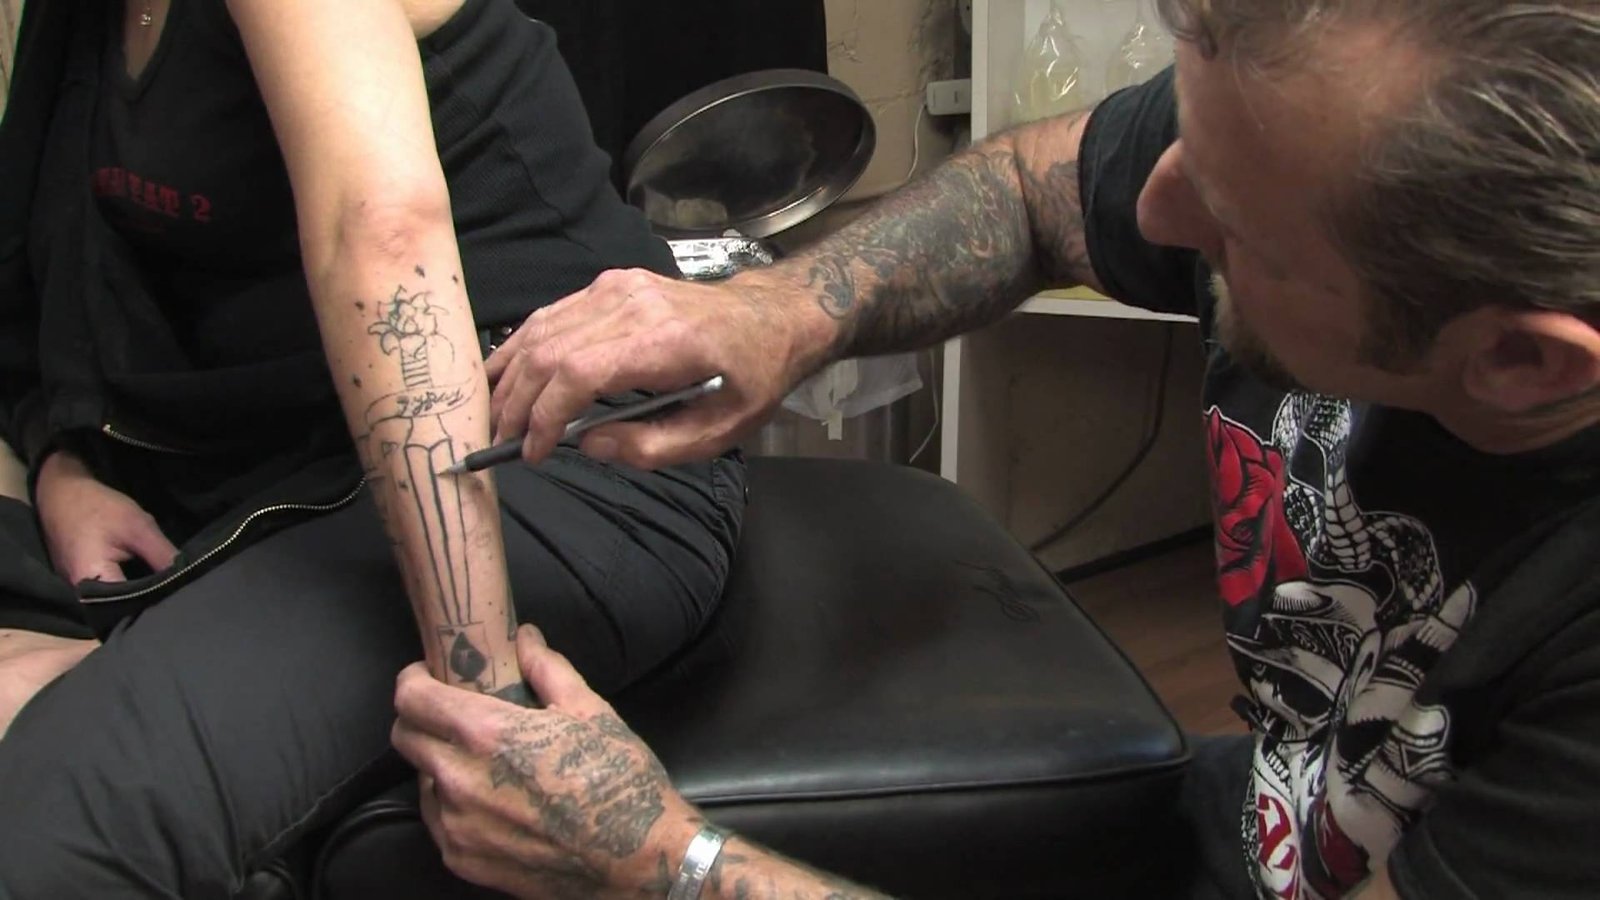 How to Make a Homemade Tattoo Gun In 10 Simple Steps